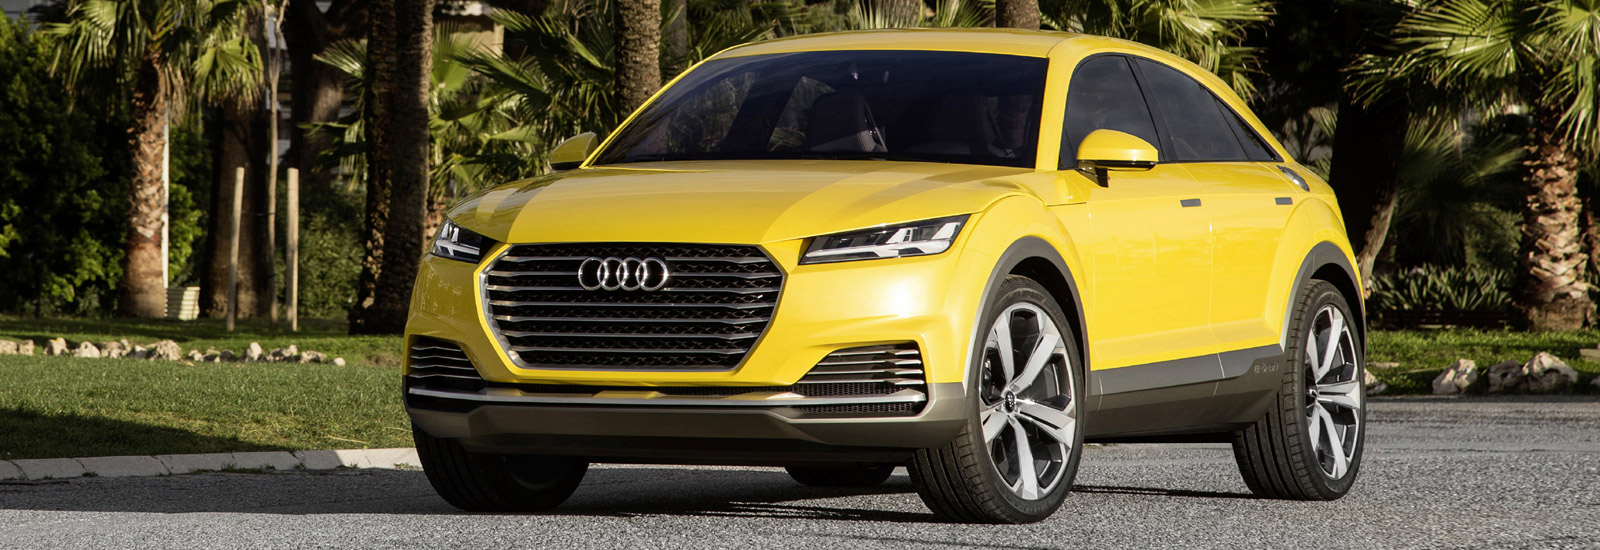 2019 Audi Q4 SUV coupe price, specs and release date  carwow